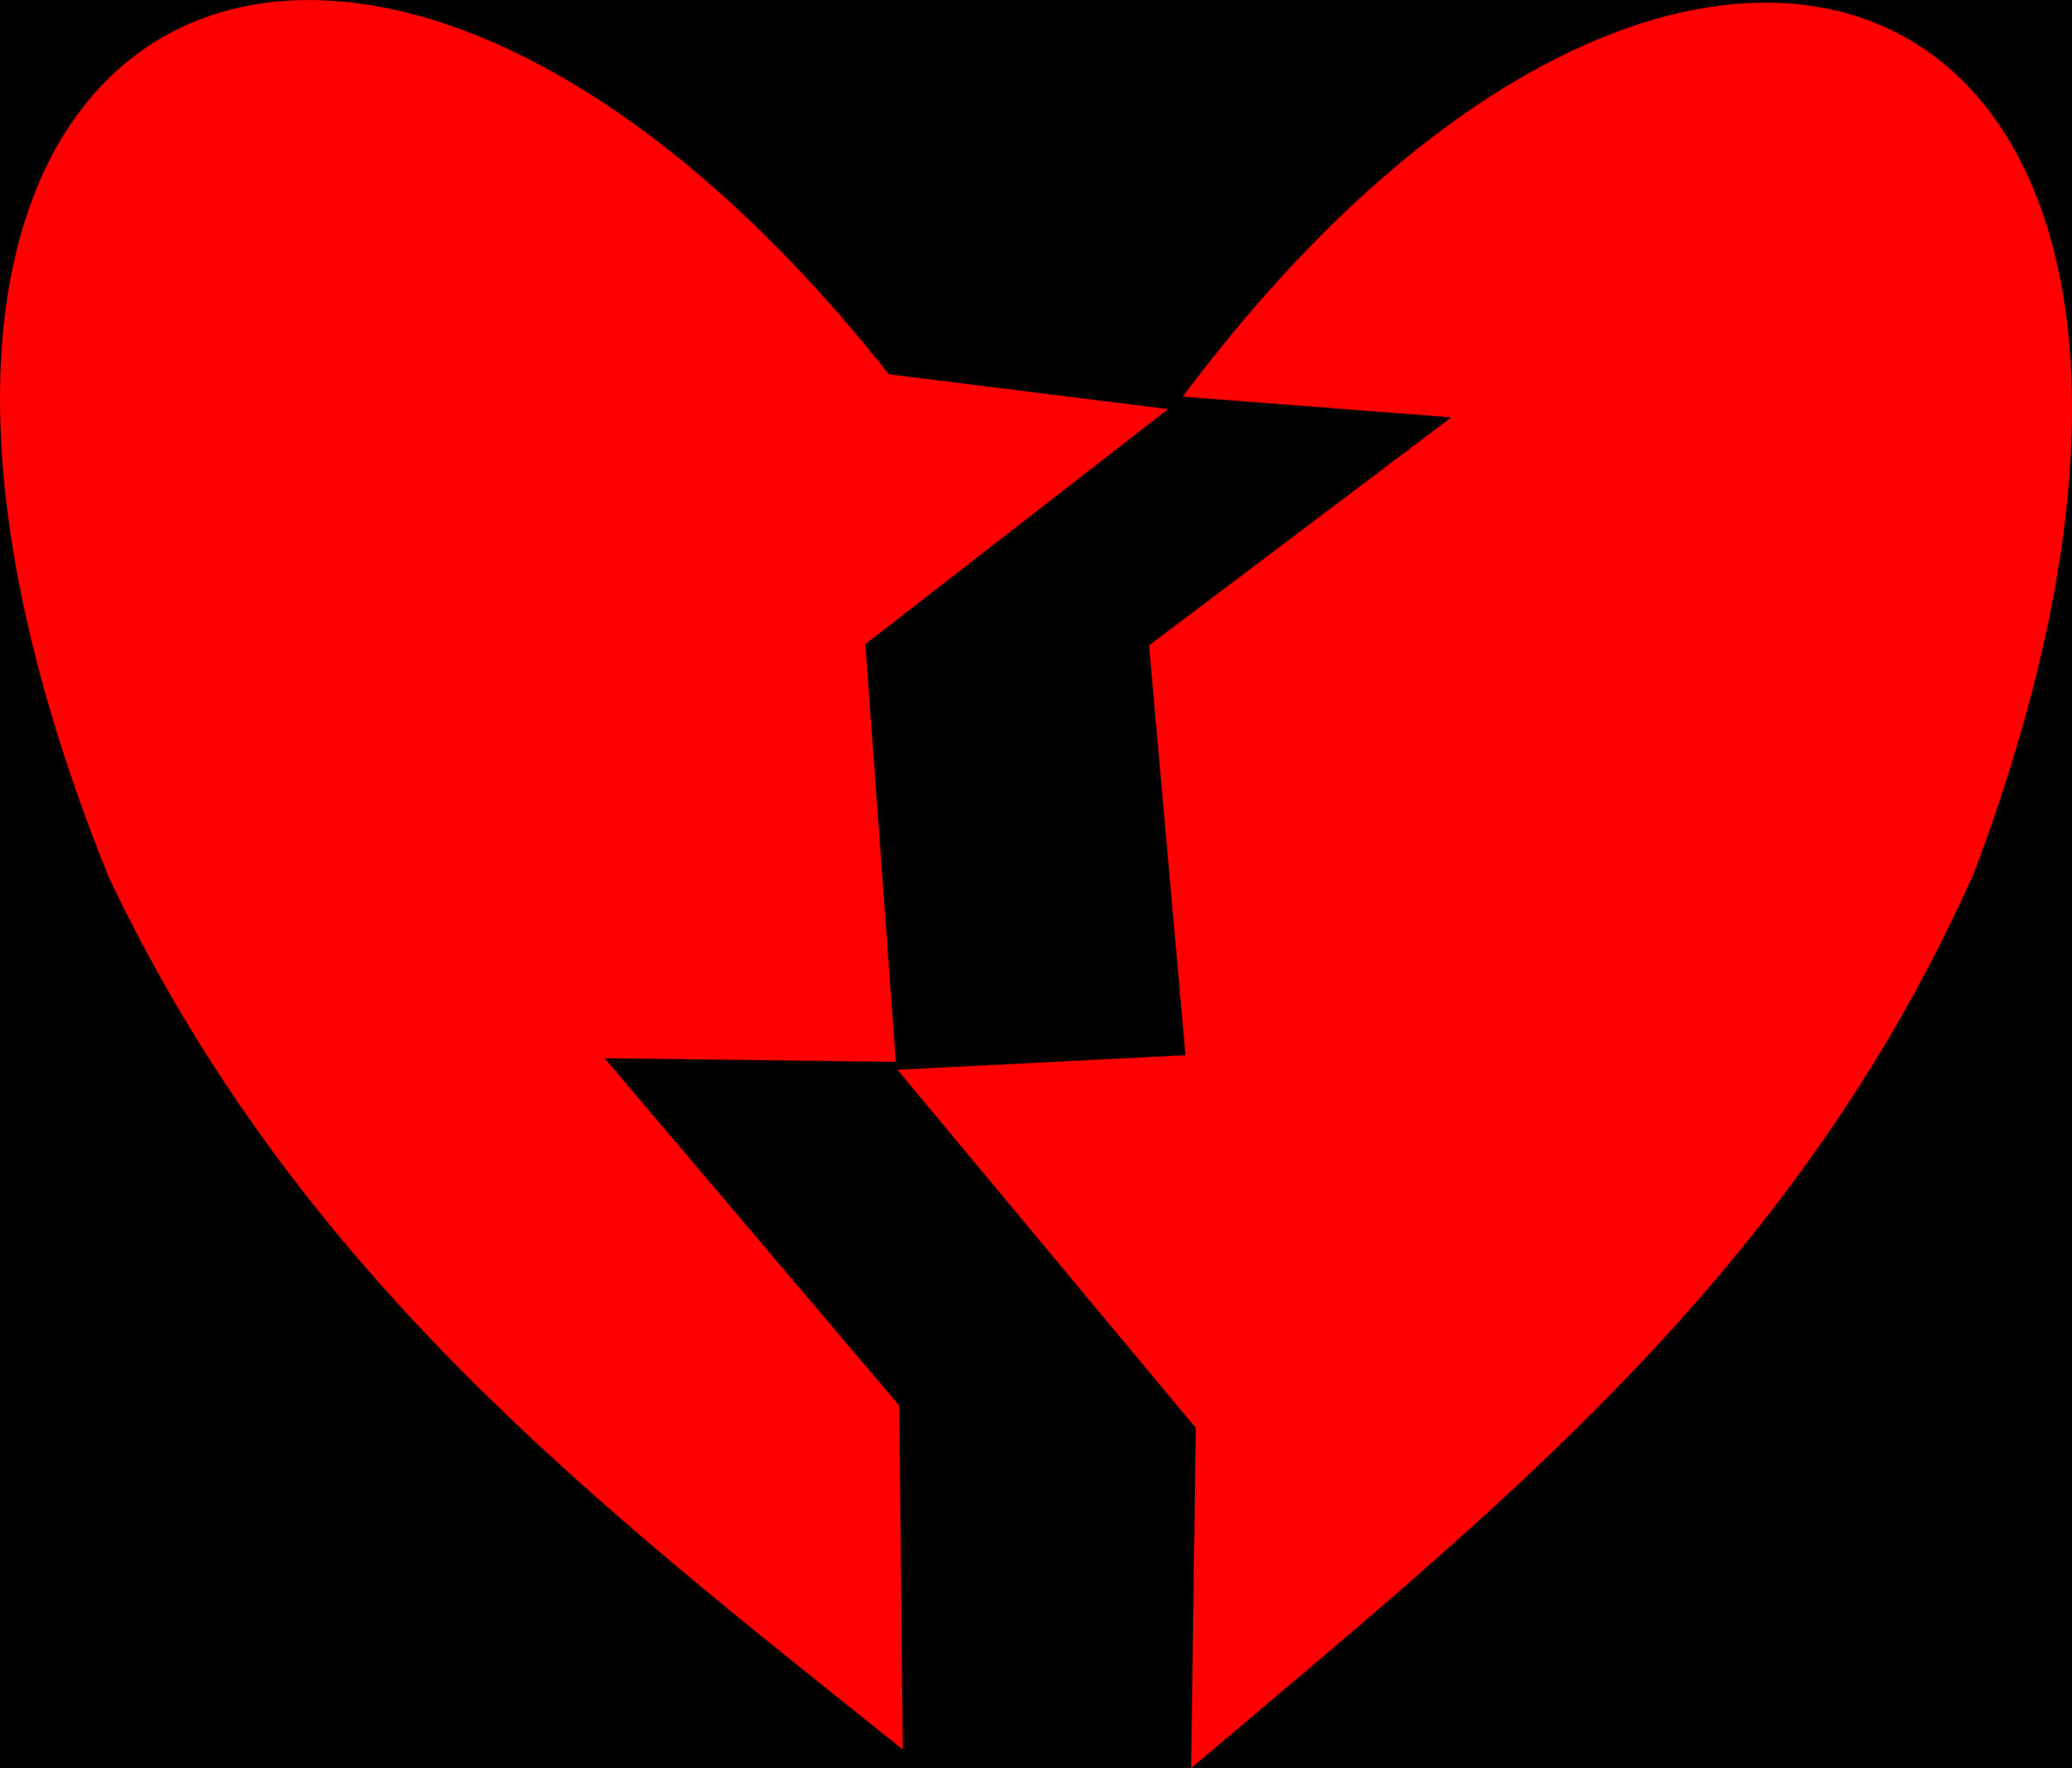 A Red Heart With Black Lines